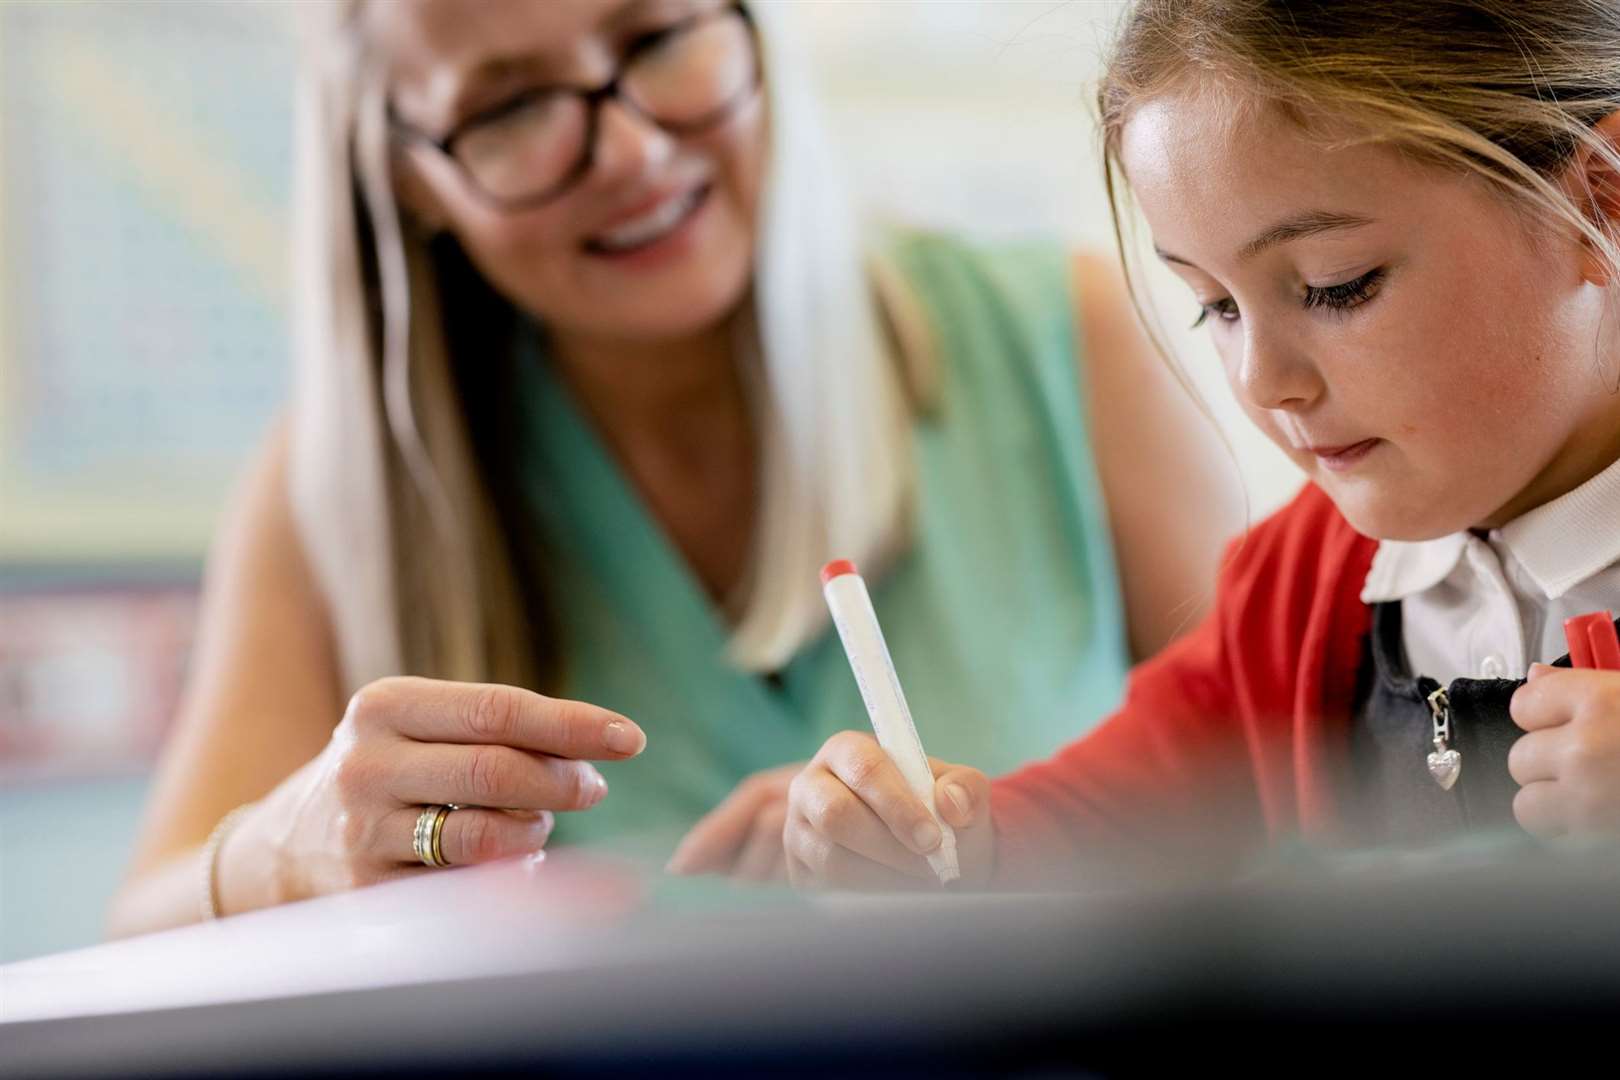 Close to 200 local schools have taken part in this year’s My Mum. Photo: iStock